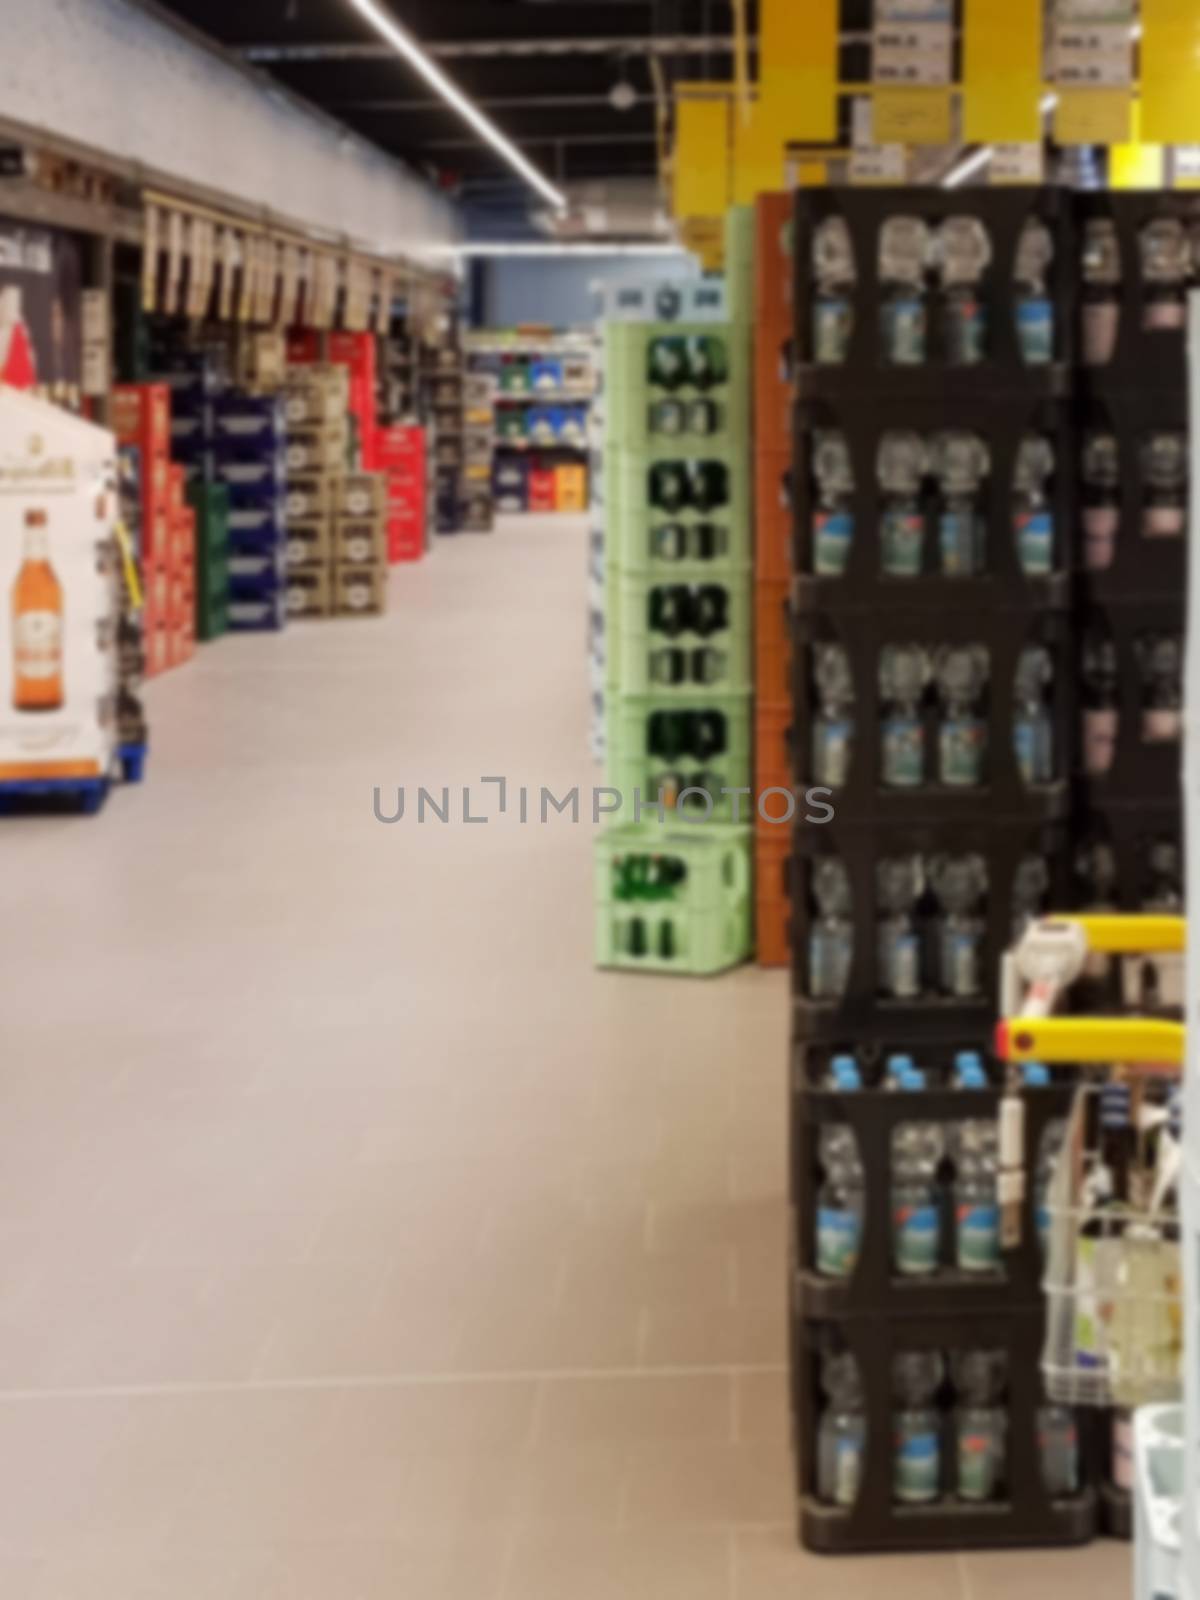 View into a beverage specialist market. Blurring when recording desired